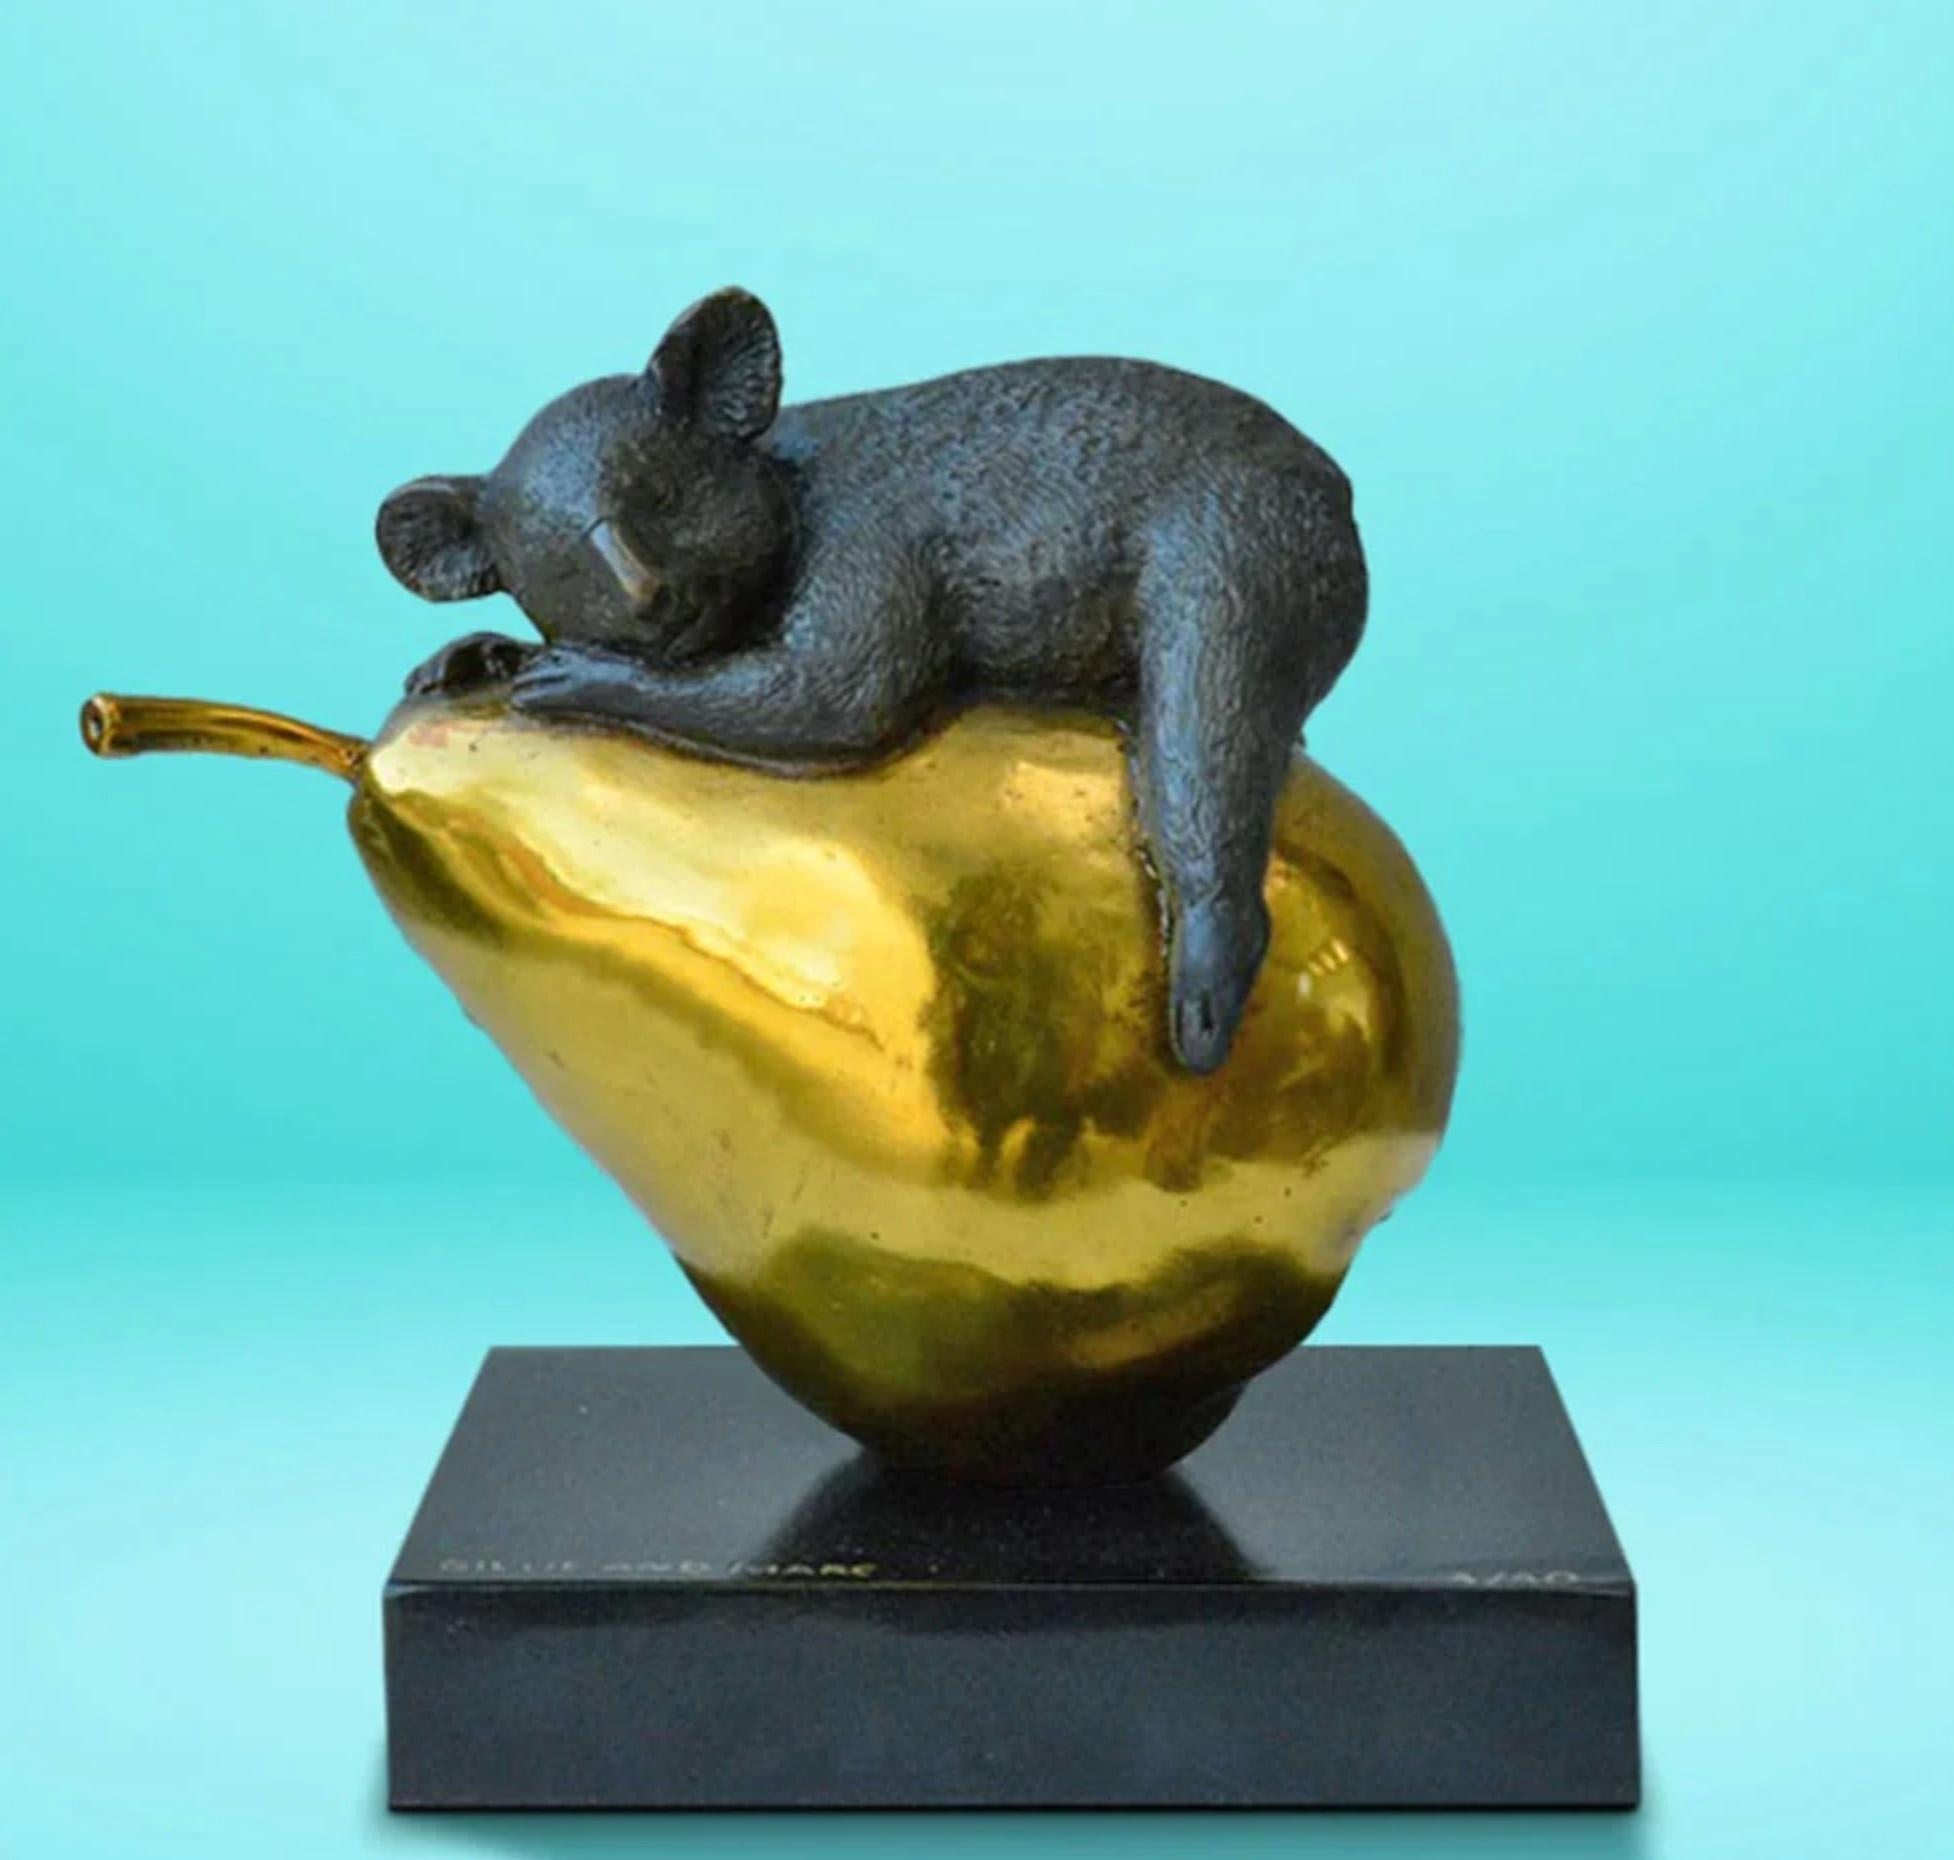 Authentic Bronze Koalas will pear... Sculpture w/ Gold Patina by Gillie and Marc - Contemporary Art by Gillie and Marc Schattner